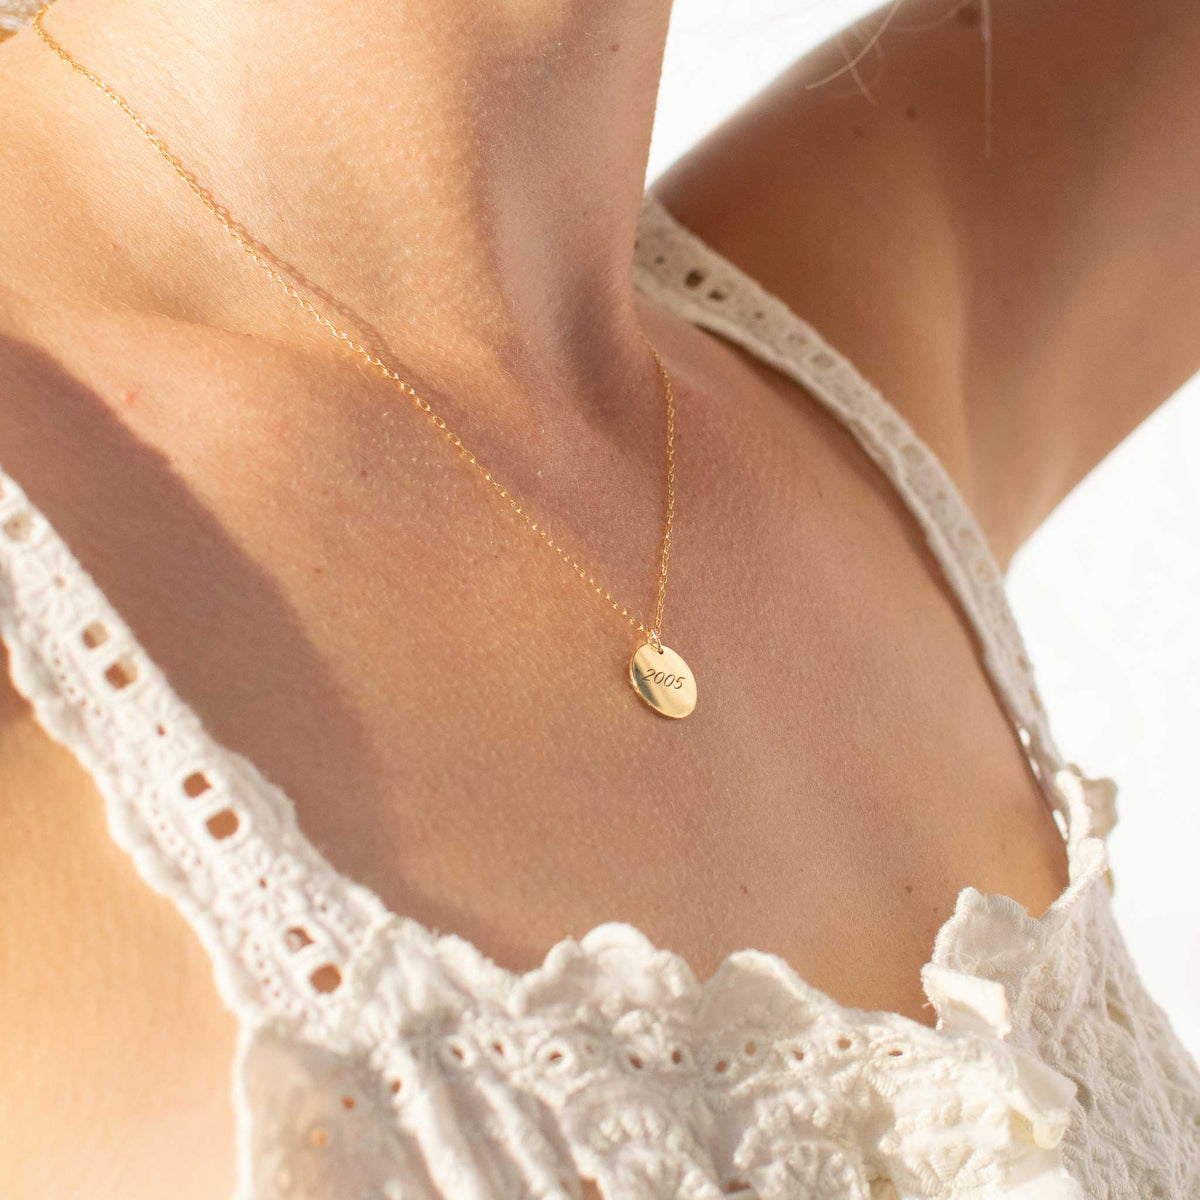 A view of a woman wearing a 13mm disk pendant from a right angle viewpoint. The necklace has 2005 engraved with the script font. 